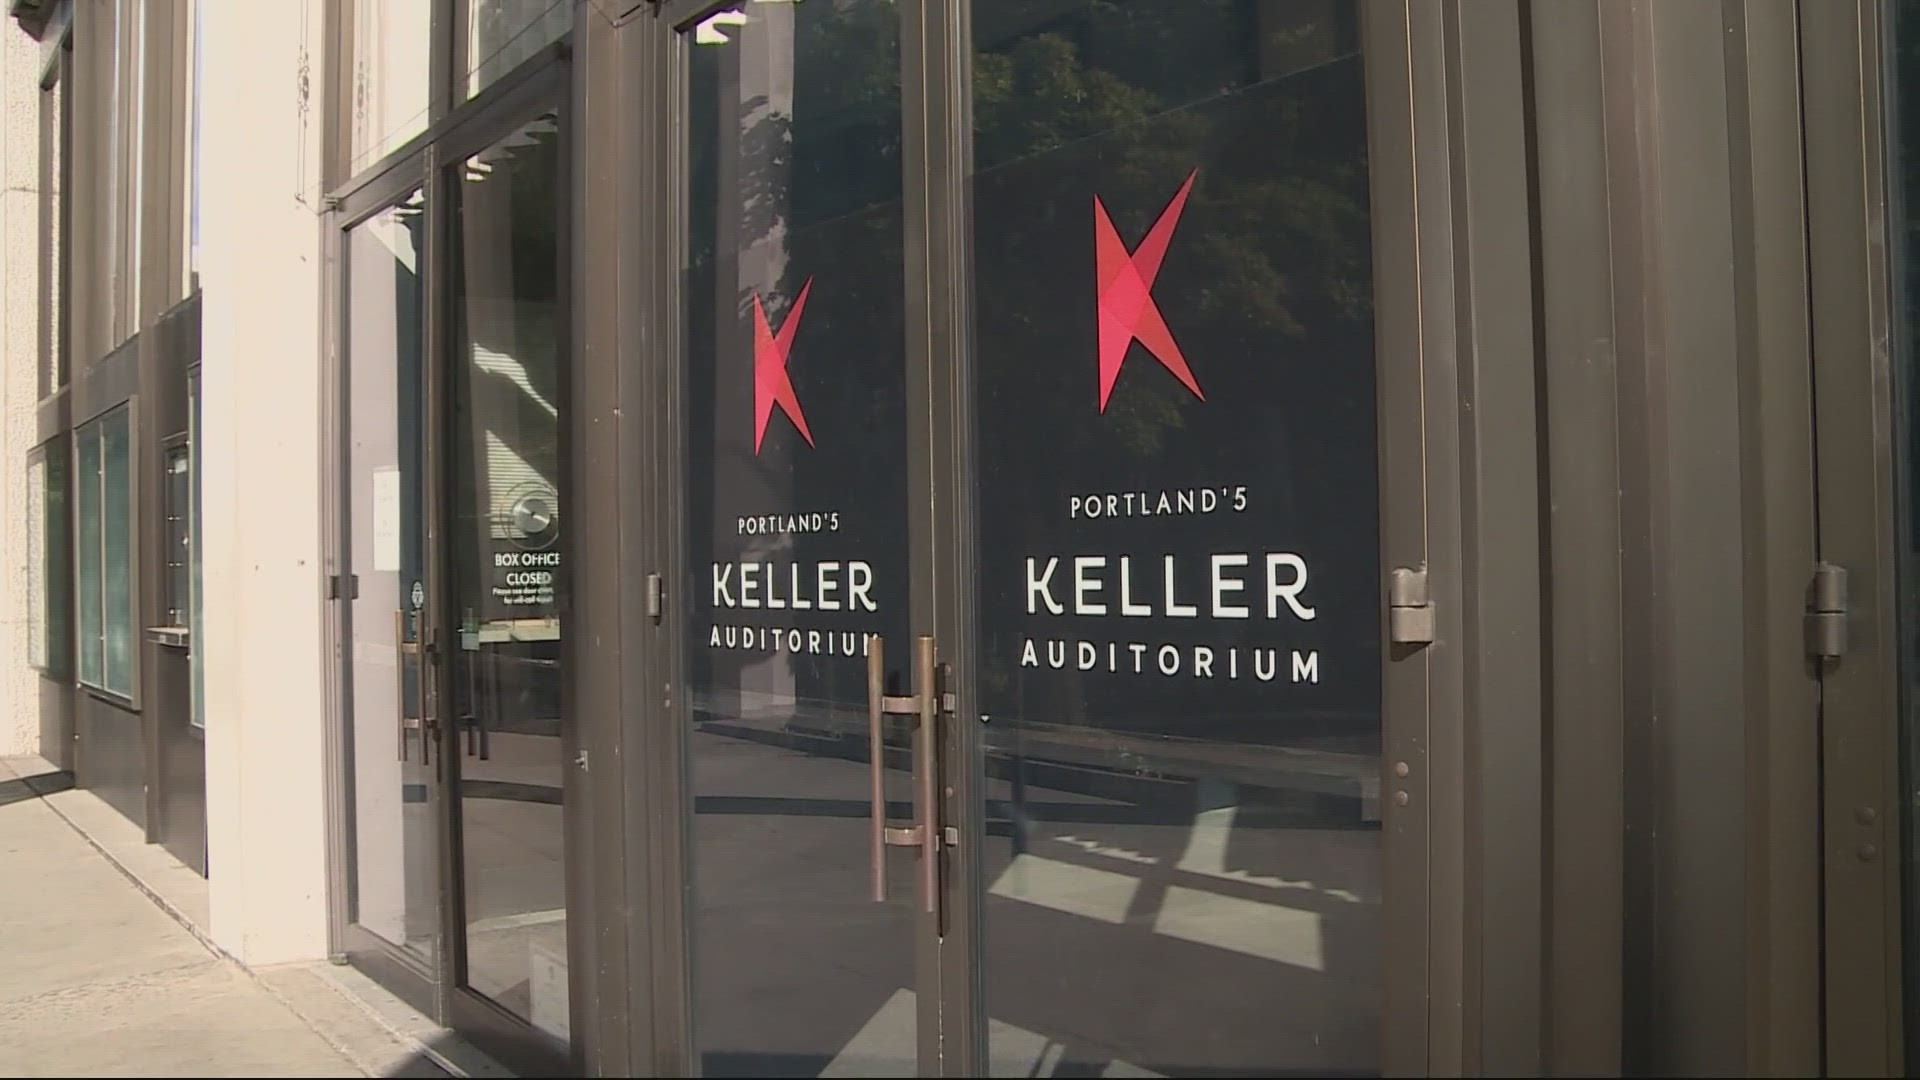 With a need for improvements and seismic upgrades, the city is considering a major renovation for the Keller Auditorium, or building a new theater venue.